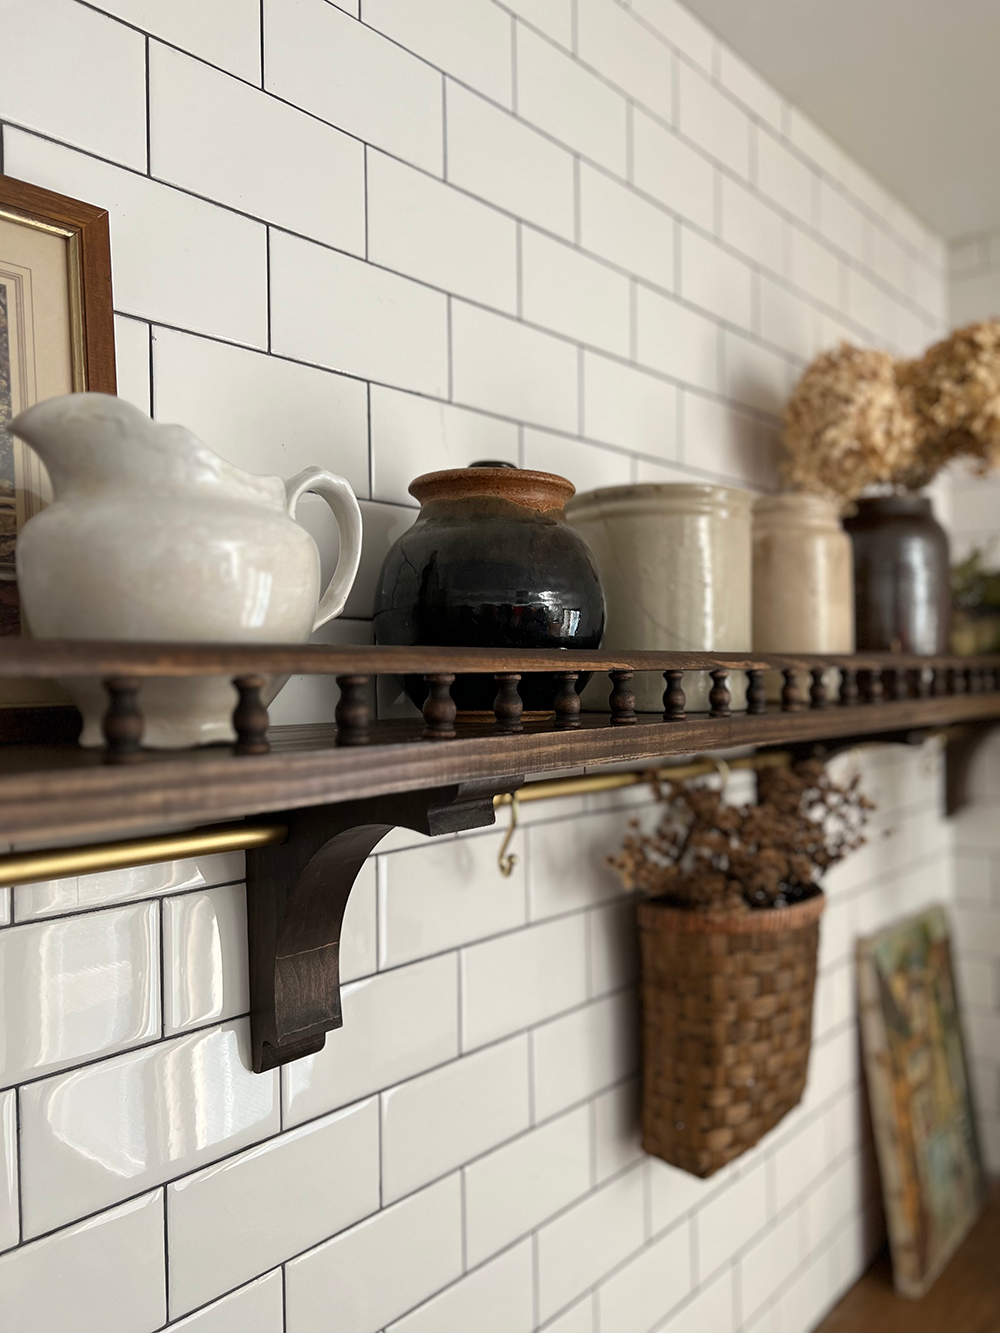 Built-In Shelves PT4: DIY Gallery Rail for Under $20 - Made by Carli